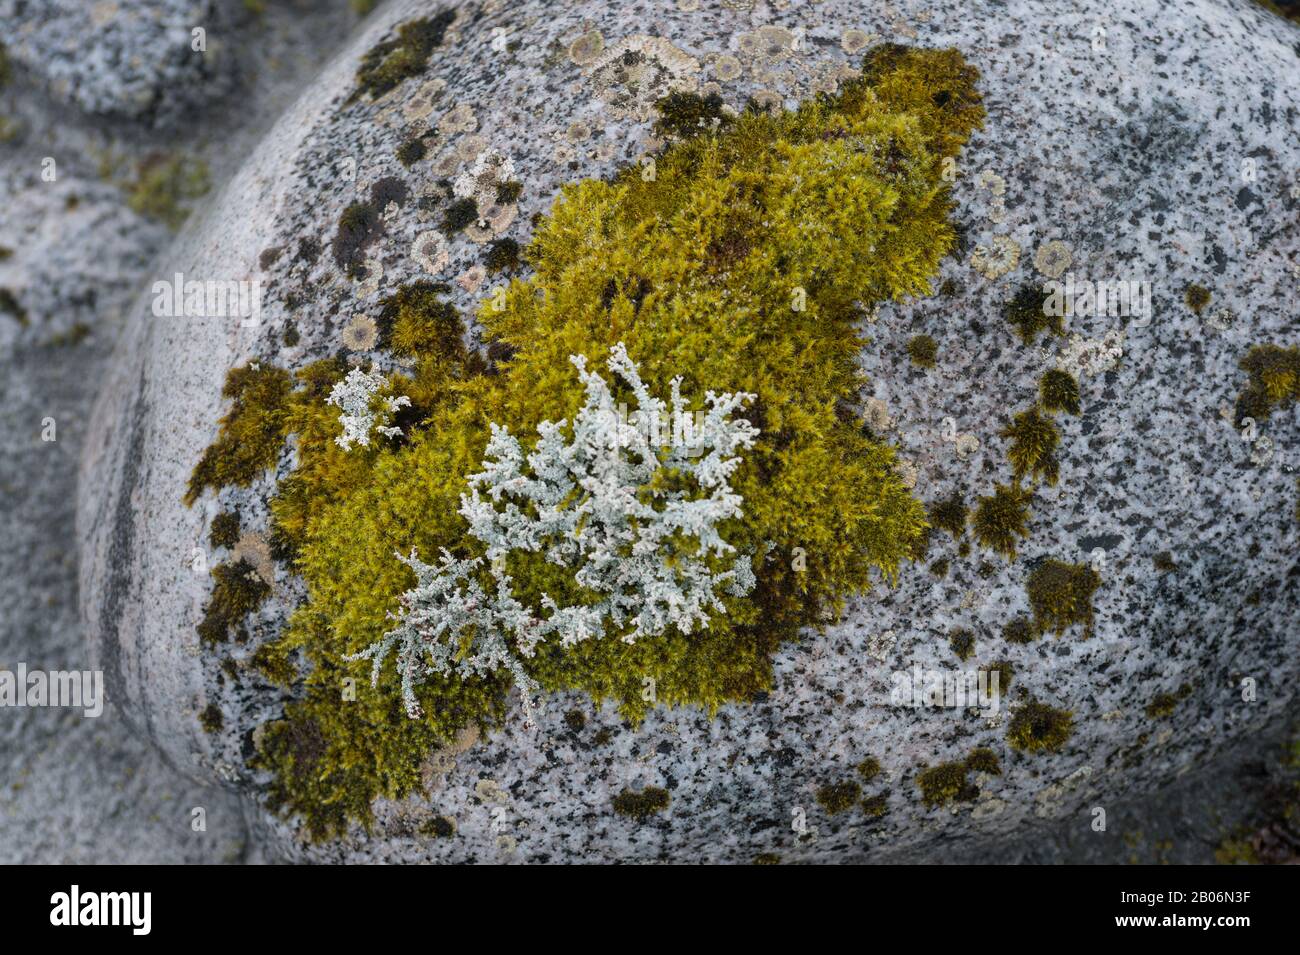 Plant life, such as mosses and lichens, is returning after glaciers melt as seen here at Baird Glacier in Scenery Cove, Thomas Bay, Tongass National F Stock Photo